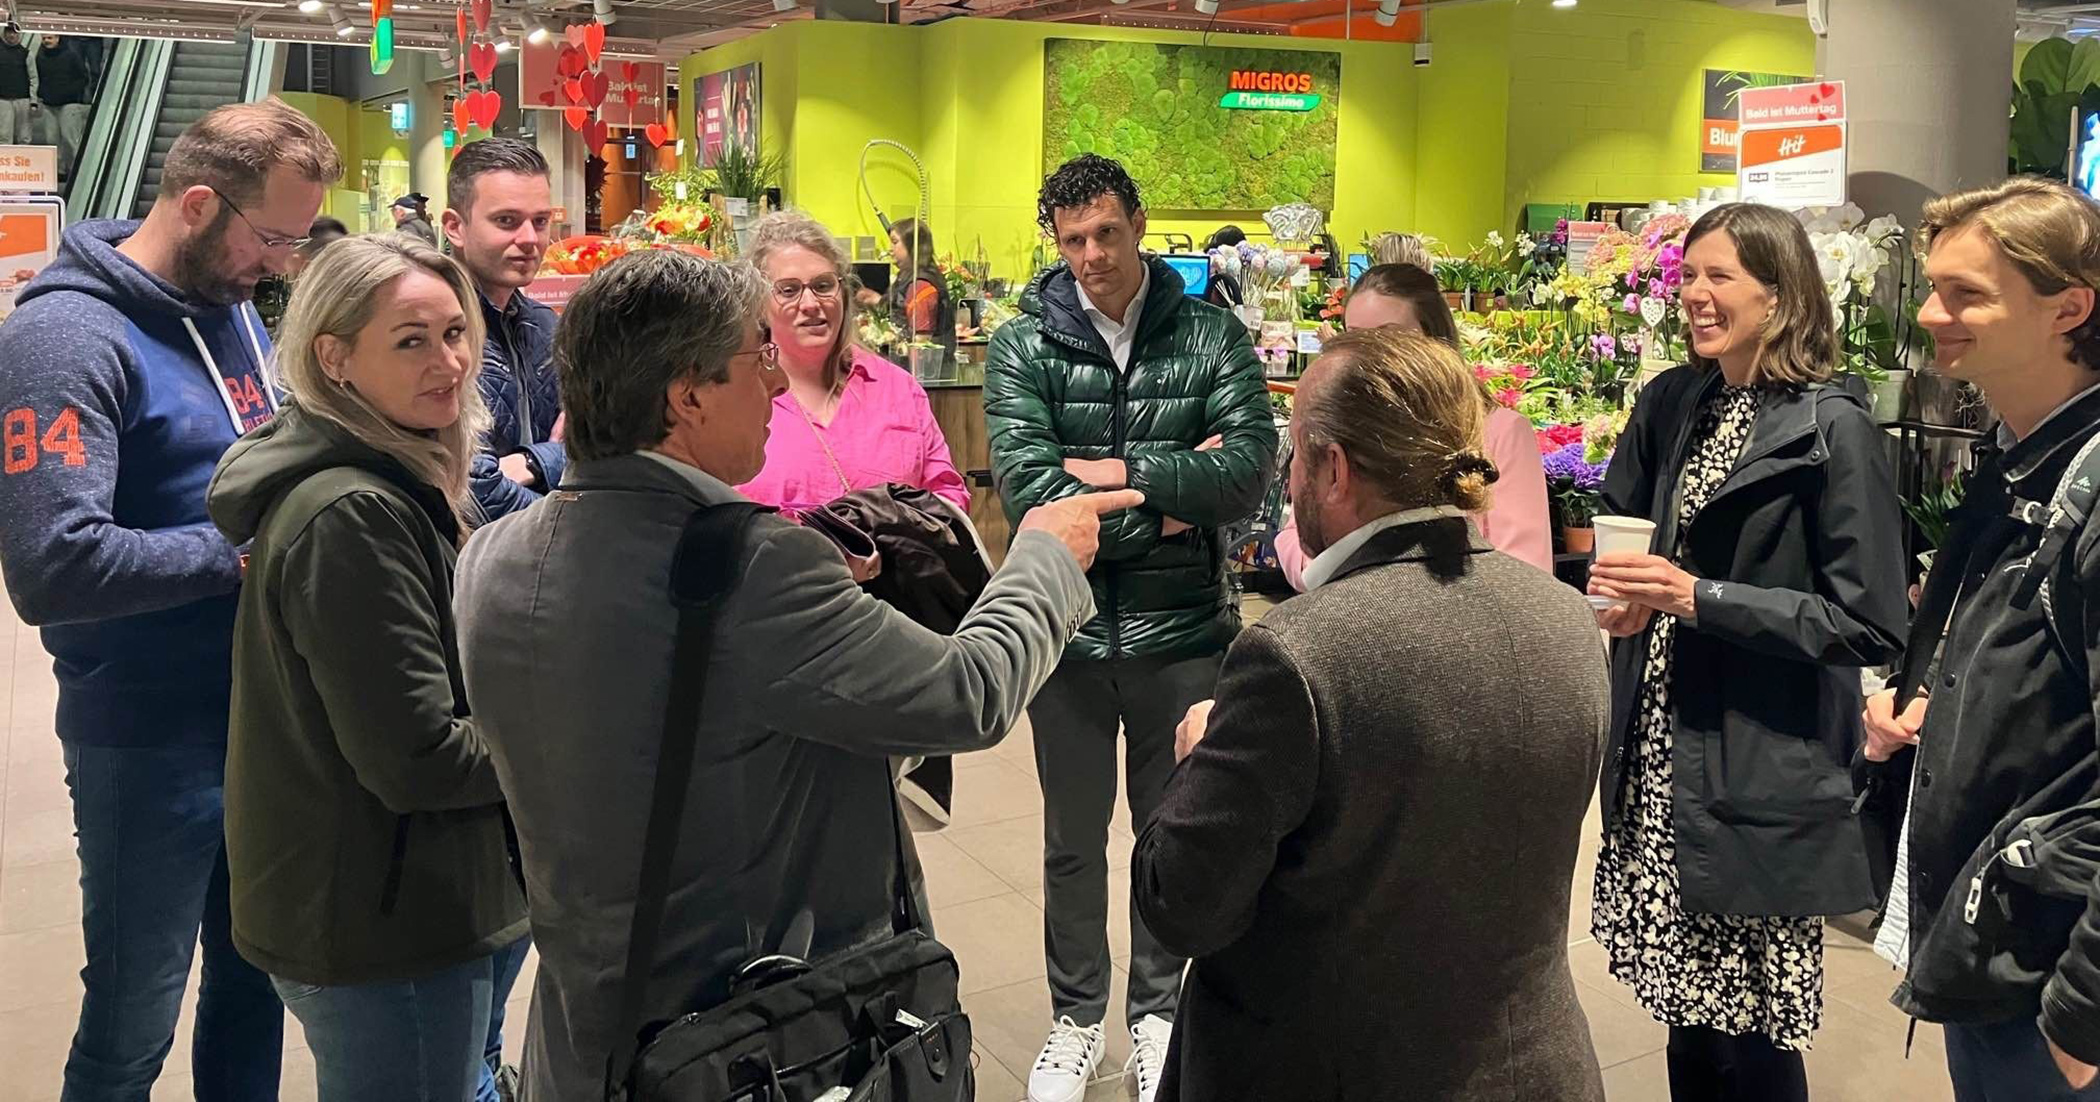 Visit of Dutch gardeners or flower growers to a Migros supermarket - one of the biggest retailers in Switzerland